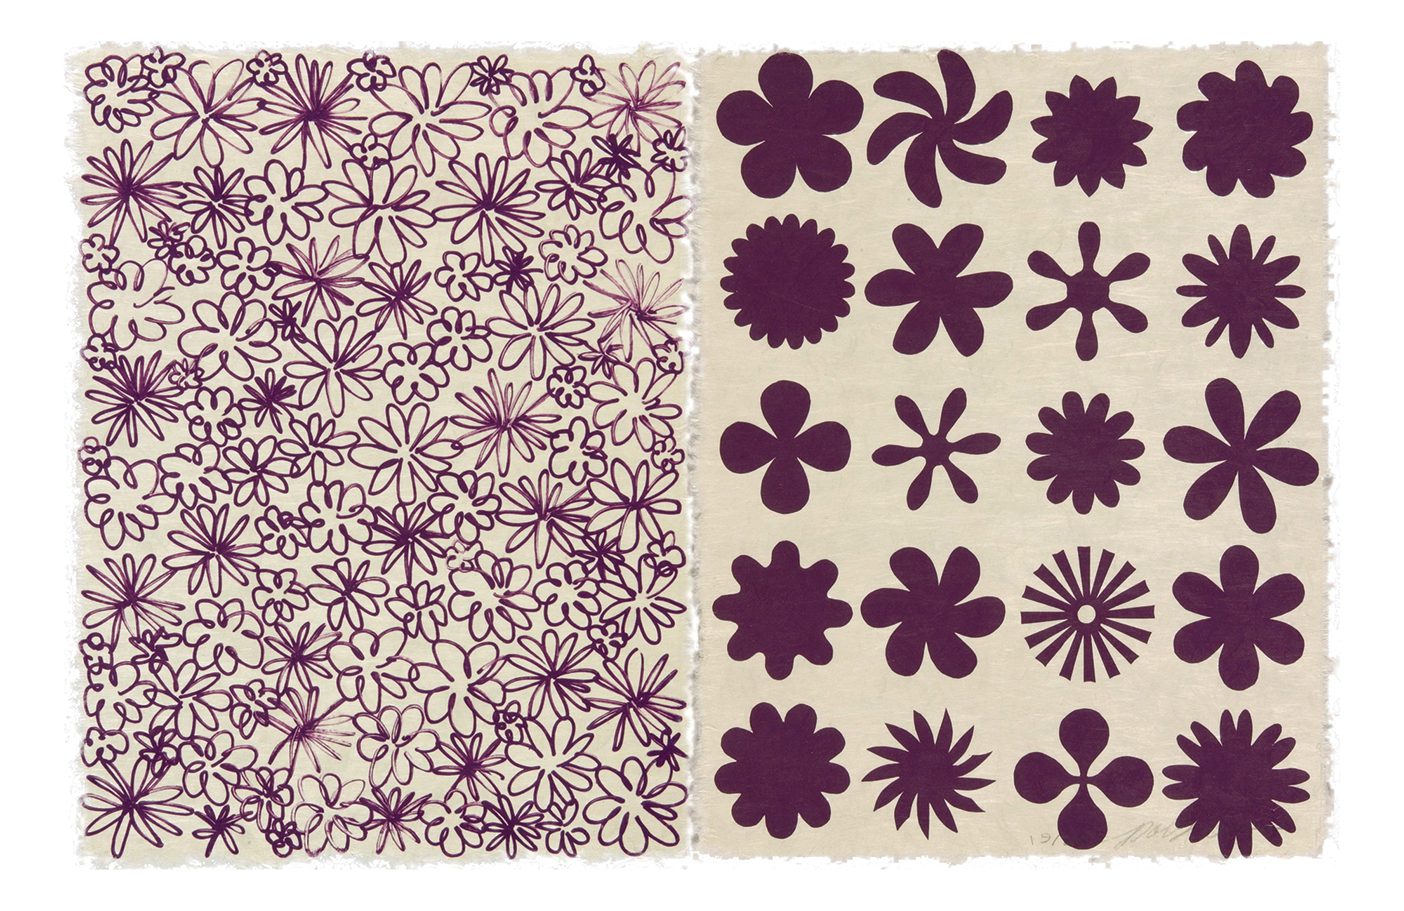 Print of purple flowers. The left half of the flowers are close together and smaller and the right half are larger and spread out evenly in rows.